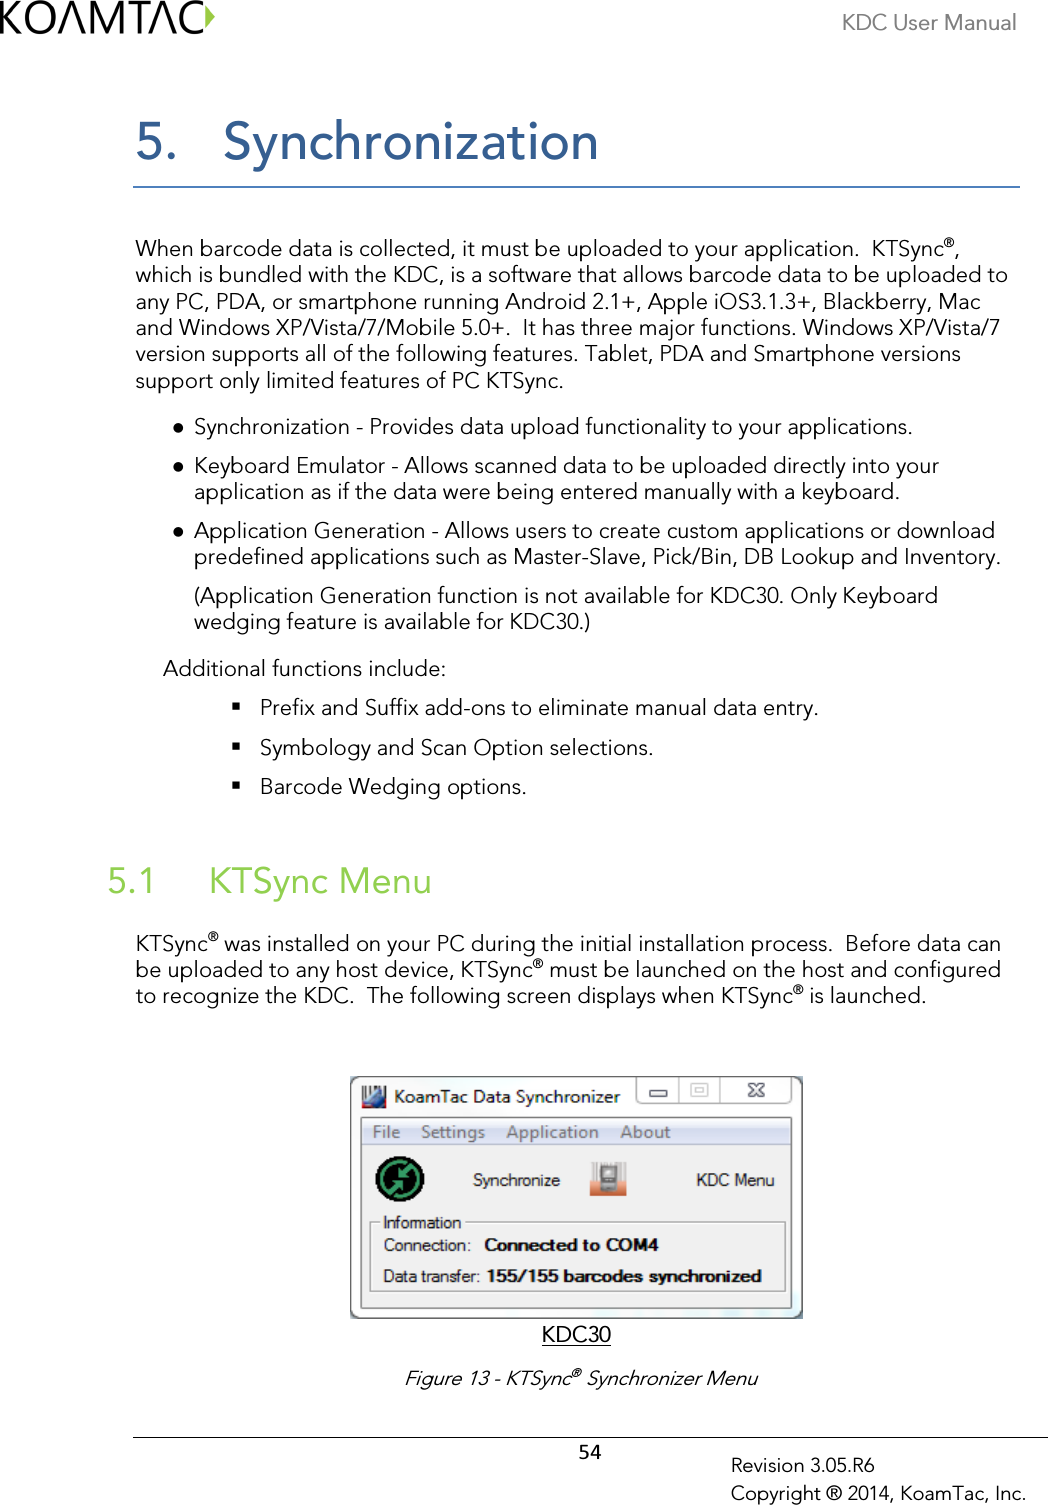 KDC User Manual  54 Revision 3.05.R6 Copyright ® 2014, KoamTac, Inc. 5.  Synchronization  When barcode data is collected, it must be uploaded to your application.  KTSync®, which is bundled with the KDC, is a software that allows barcode data to be uploaded to any PC, PDA, or smartphone running Android 2.1+, Apple iOS3.1.3+, Blackberry, Mac and Windows XP/Vista/7/Mobile 5.0+.  It has three major functions. Windows XP/Vista/7 version supports all of the following features. Tablet, PDA and Smartphone versions support only limited features of PC KTSync.  Synchronization - Provides data upload functionality to your applications.  Keyboard Emulator - Allows scanned data to be uploaded directly into your application as if the data were being entered manually with a keyboard.  Application Generation - Allows users to create custom applications or download predefined applications such as Master-Slave, Pick/Bin, DB Lookup and Inventory. (Application Generation function is not available for KDC30. Only Keyboard wedging feature is available for KDC30.)   Additional functions include:  Prefix and Suffix add-ons to eliminate manual data entry.  Symbology and Scan Option selections.  Barcode Wedging options.   KTSync Menu  5.1 KTSync® was installed on your PC during the initial installation process.  Before data can be uploaded to any host device, KTSync® must be launched on the host and configured to recognize the KDC.  The following screen displays when KTSync® is launched.    KDC30  Figure 13 - KTSync® Synchronizer Menu 